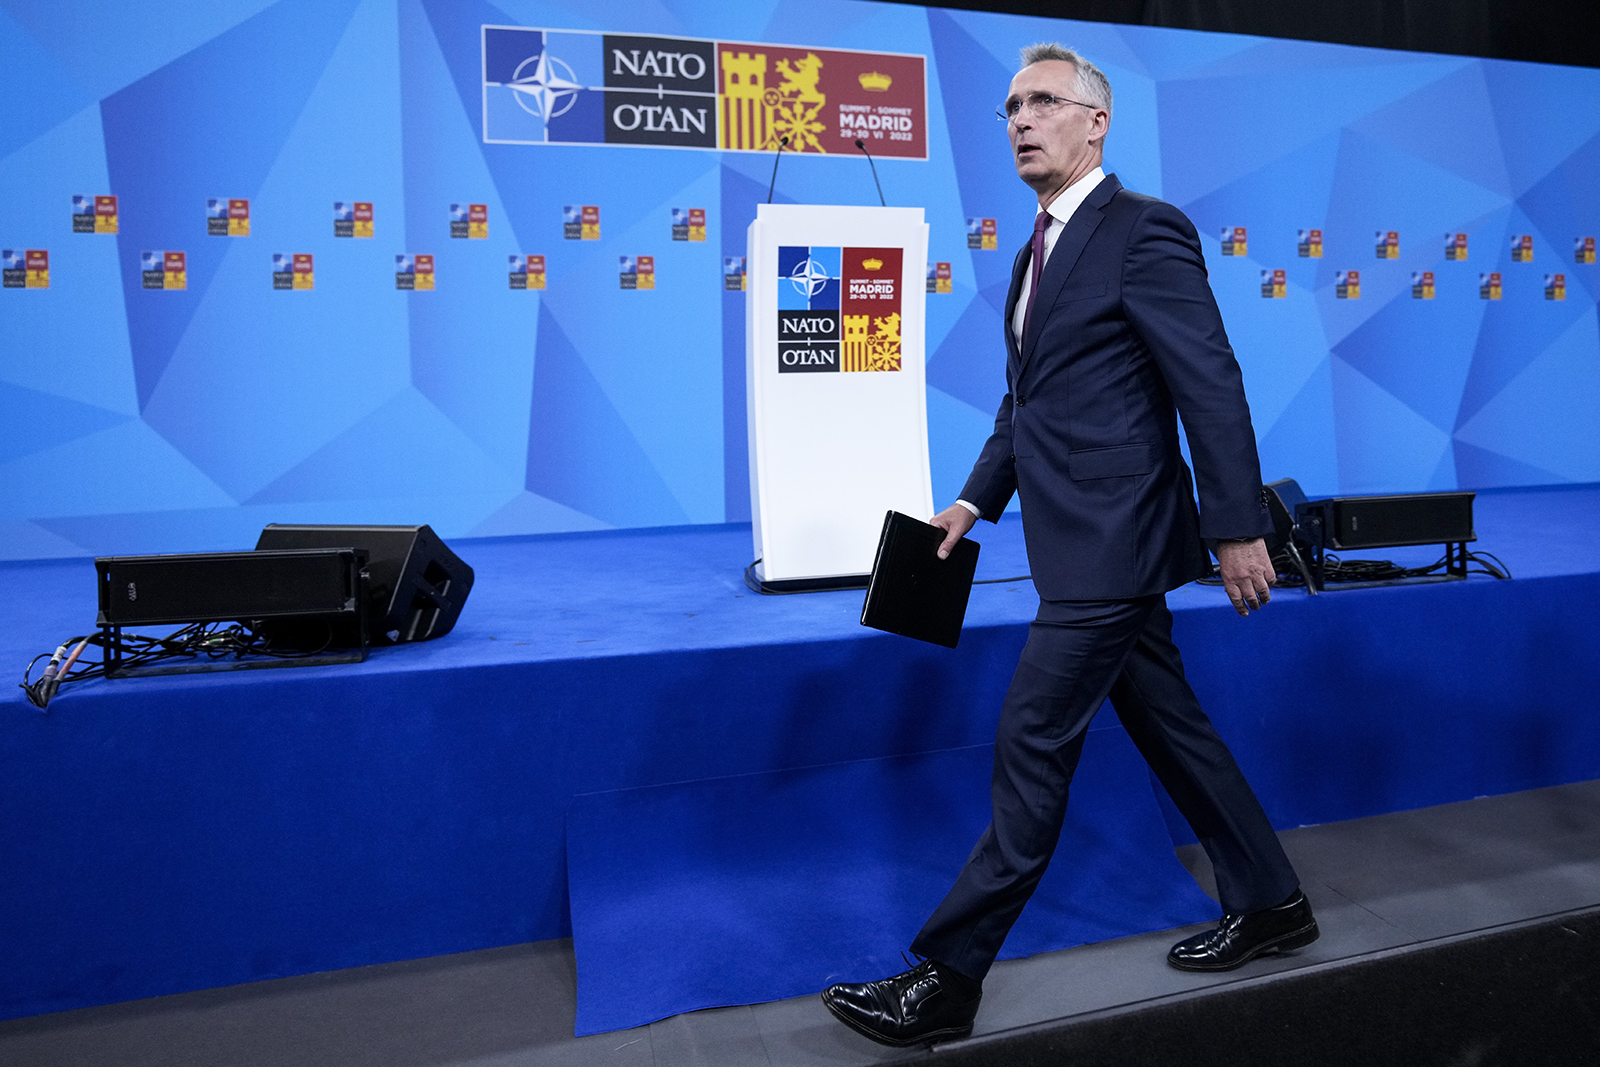 NATO Secretary General Jens Stoltenberg arrives at a press conference during a NATO summit in Madrid, Spain on June 28. 